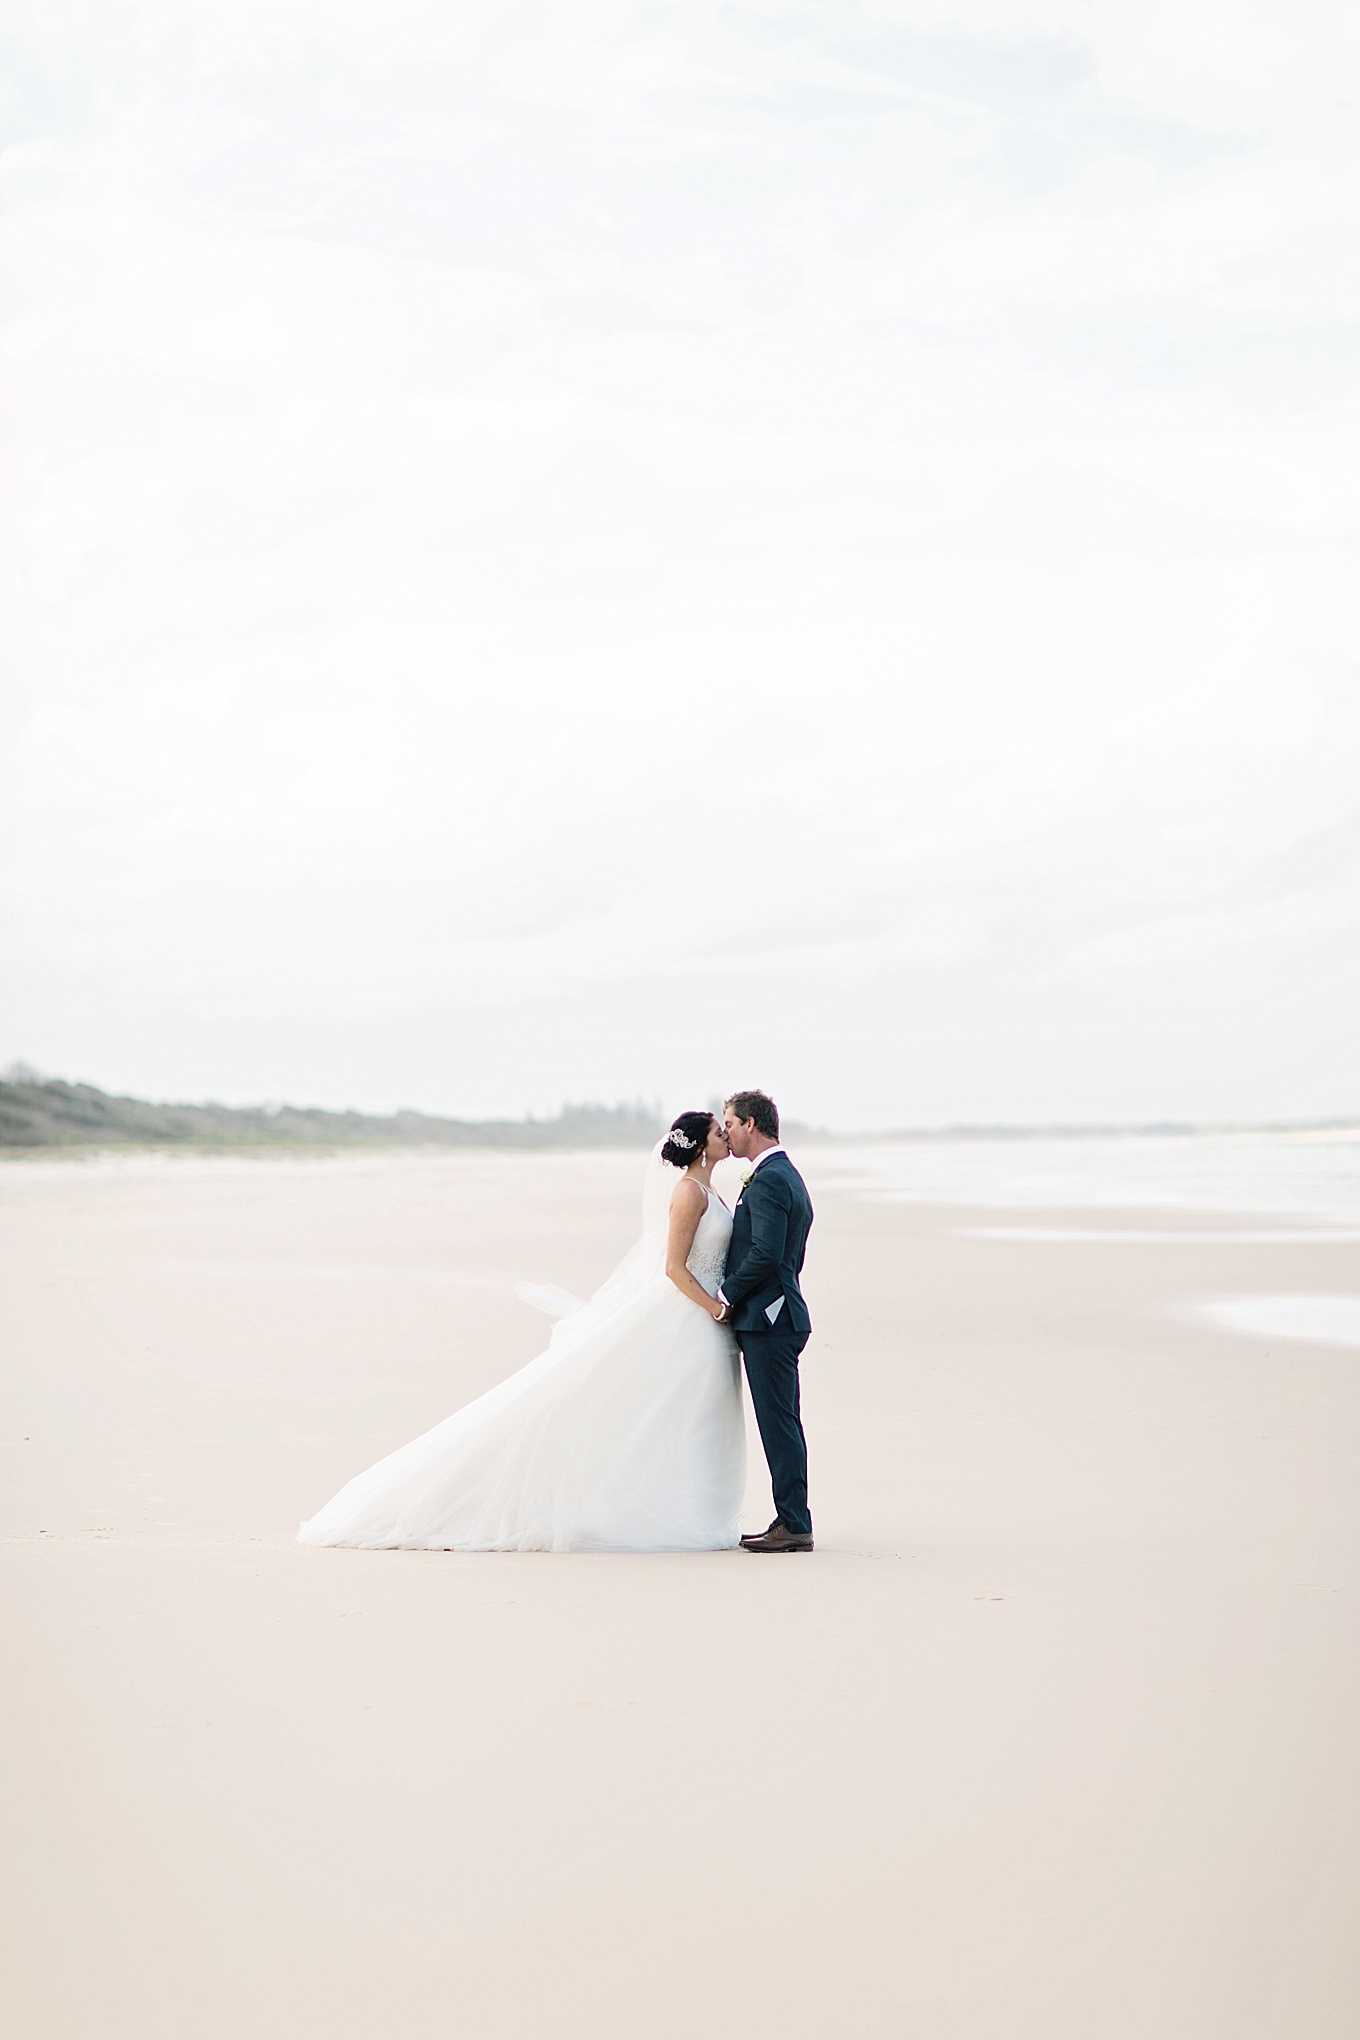 Renee and Adam Green Cathedral Forster wedding photographer